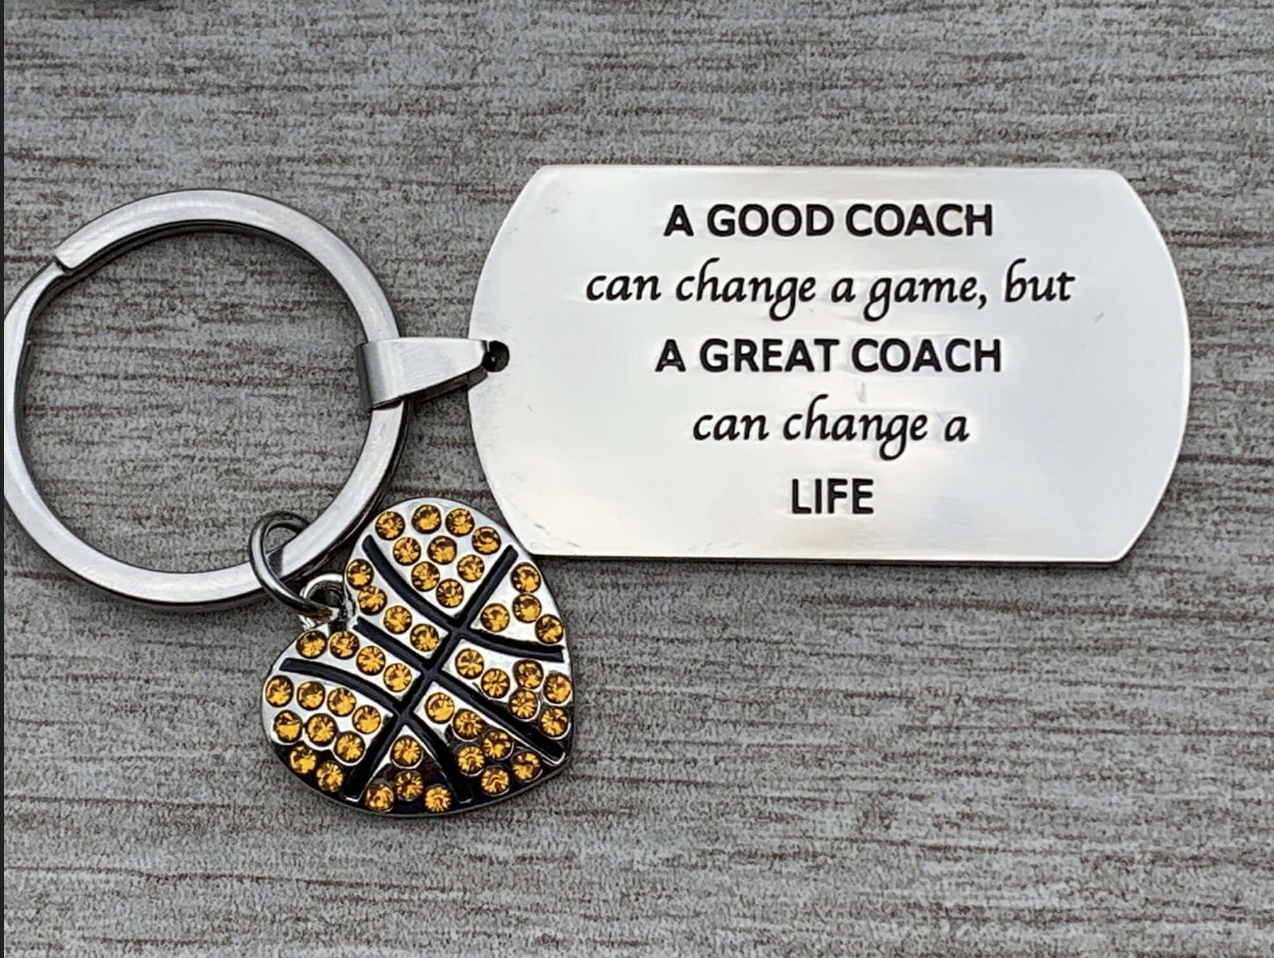 Basketball Coach Keychain - A Great Coach Can Change a Life